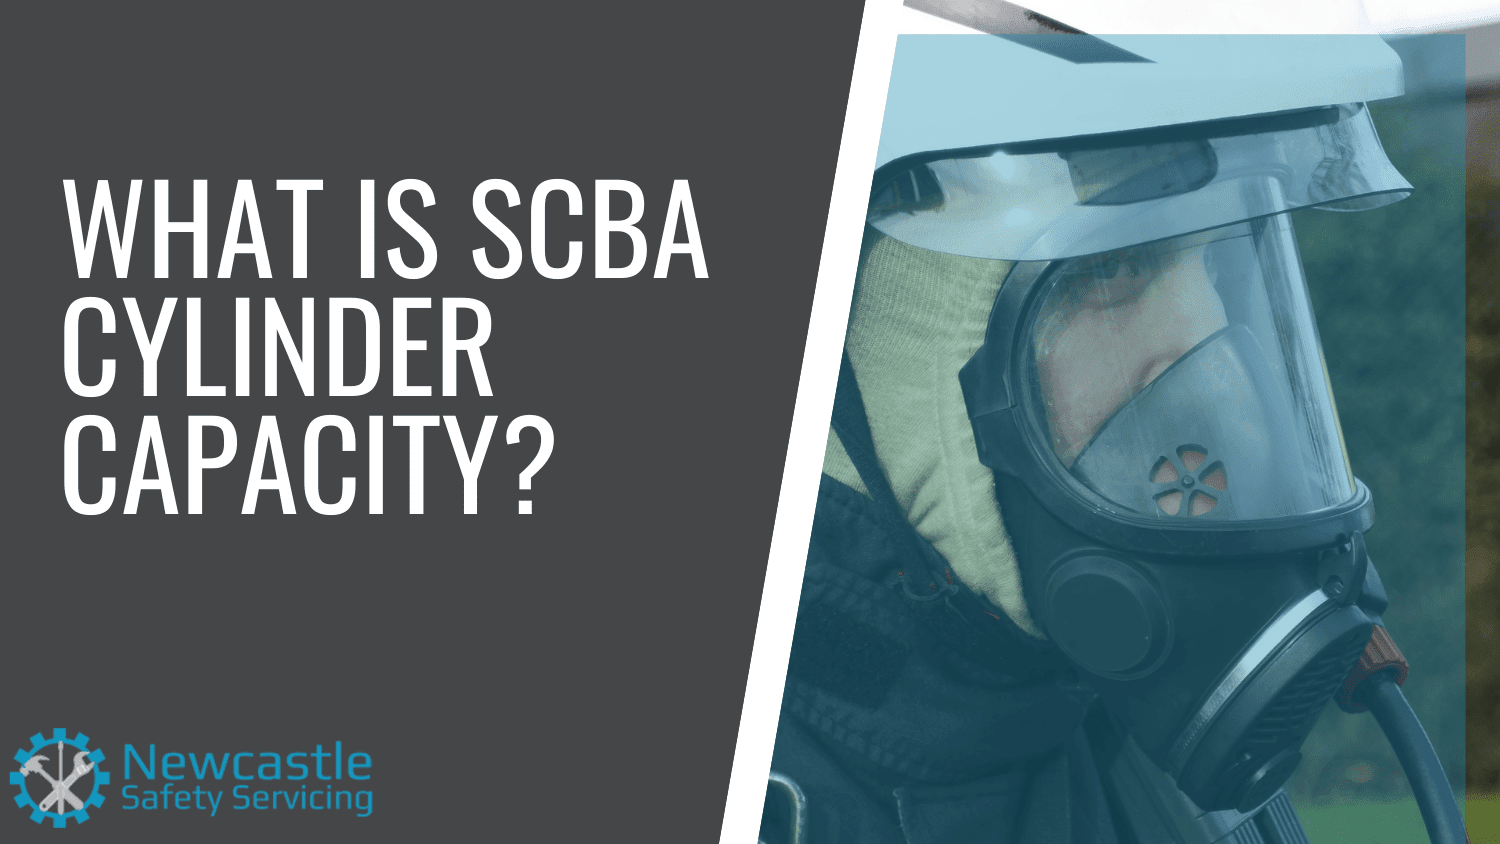 SCBA Cylinder Capacity Cover Image